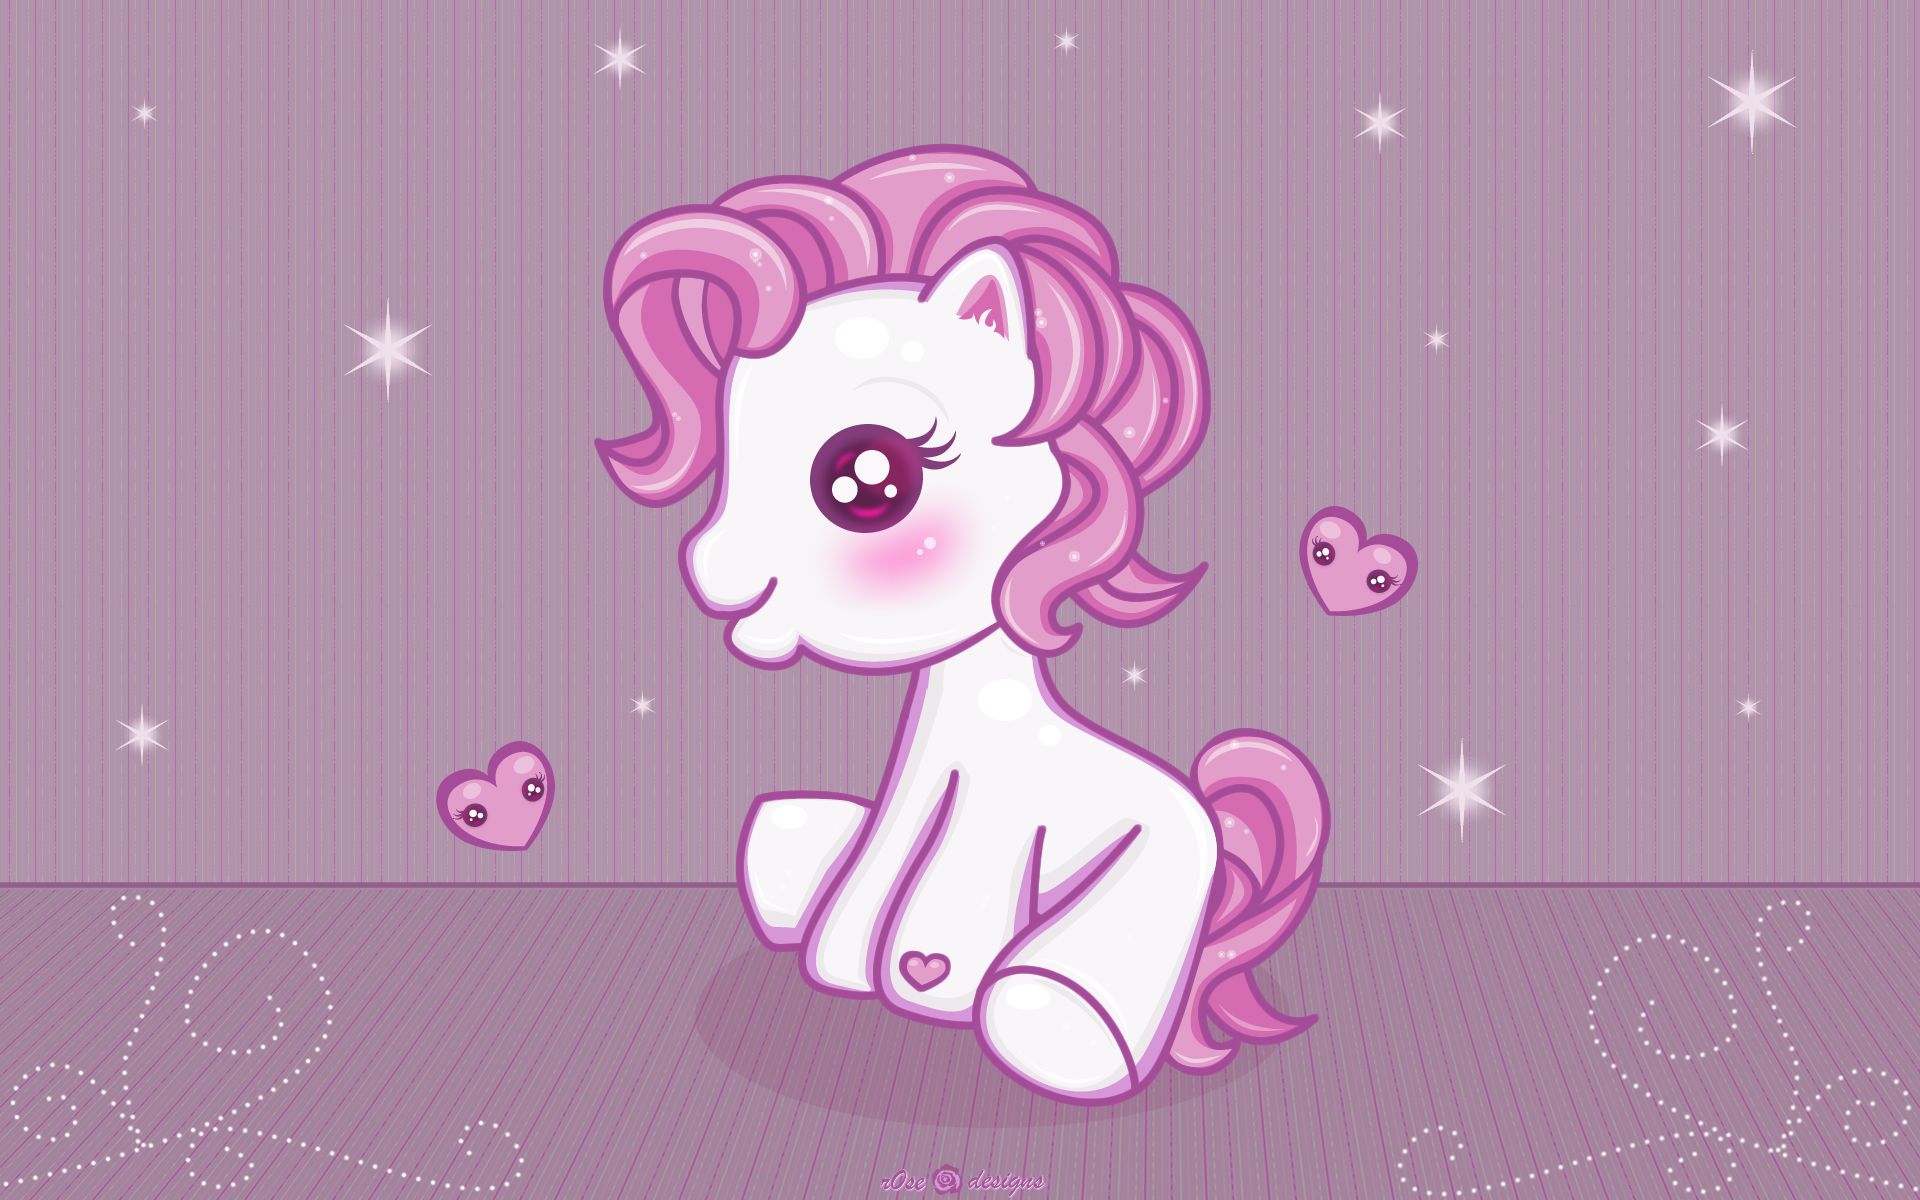 Cute Pony Wallpapers